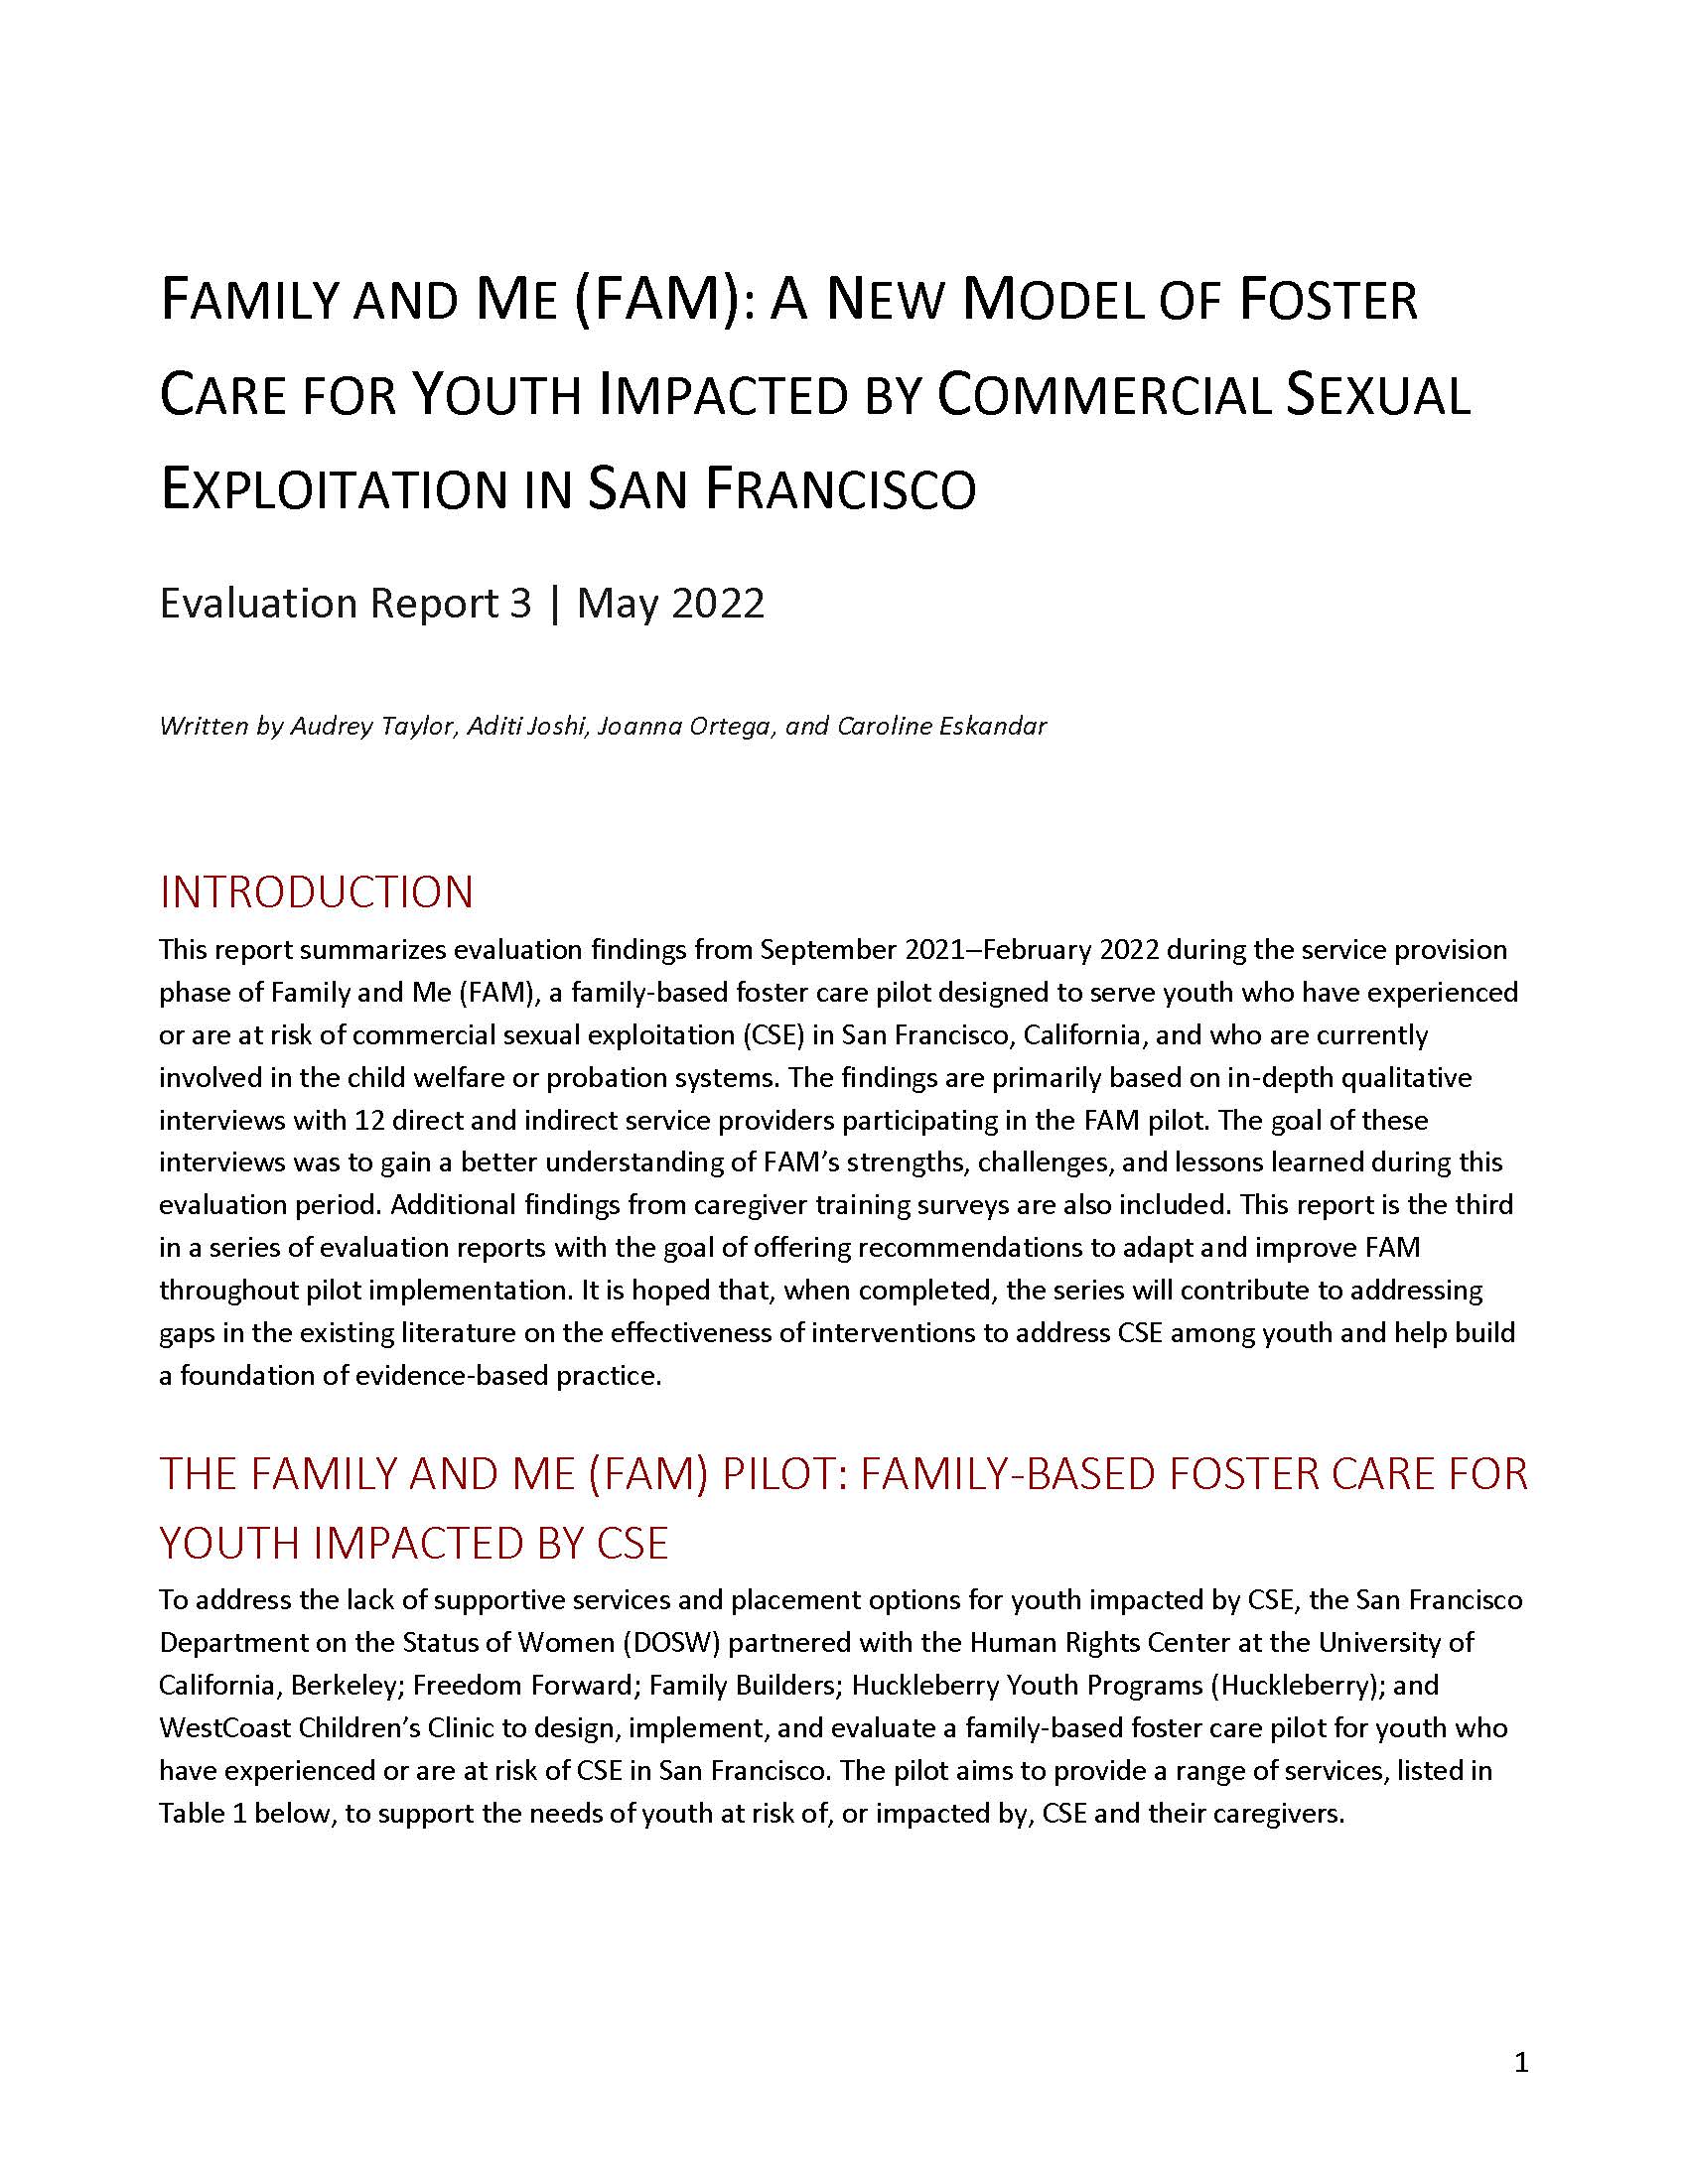 Family and Me (FAM): A New Model of Foster Care for Youth Impacted by Commercial Sexual Exploitation in San Francisco (Evaluation 3)